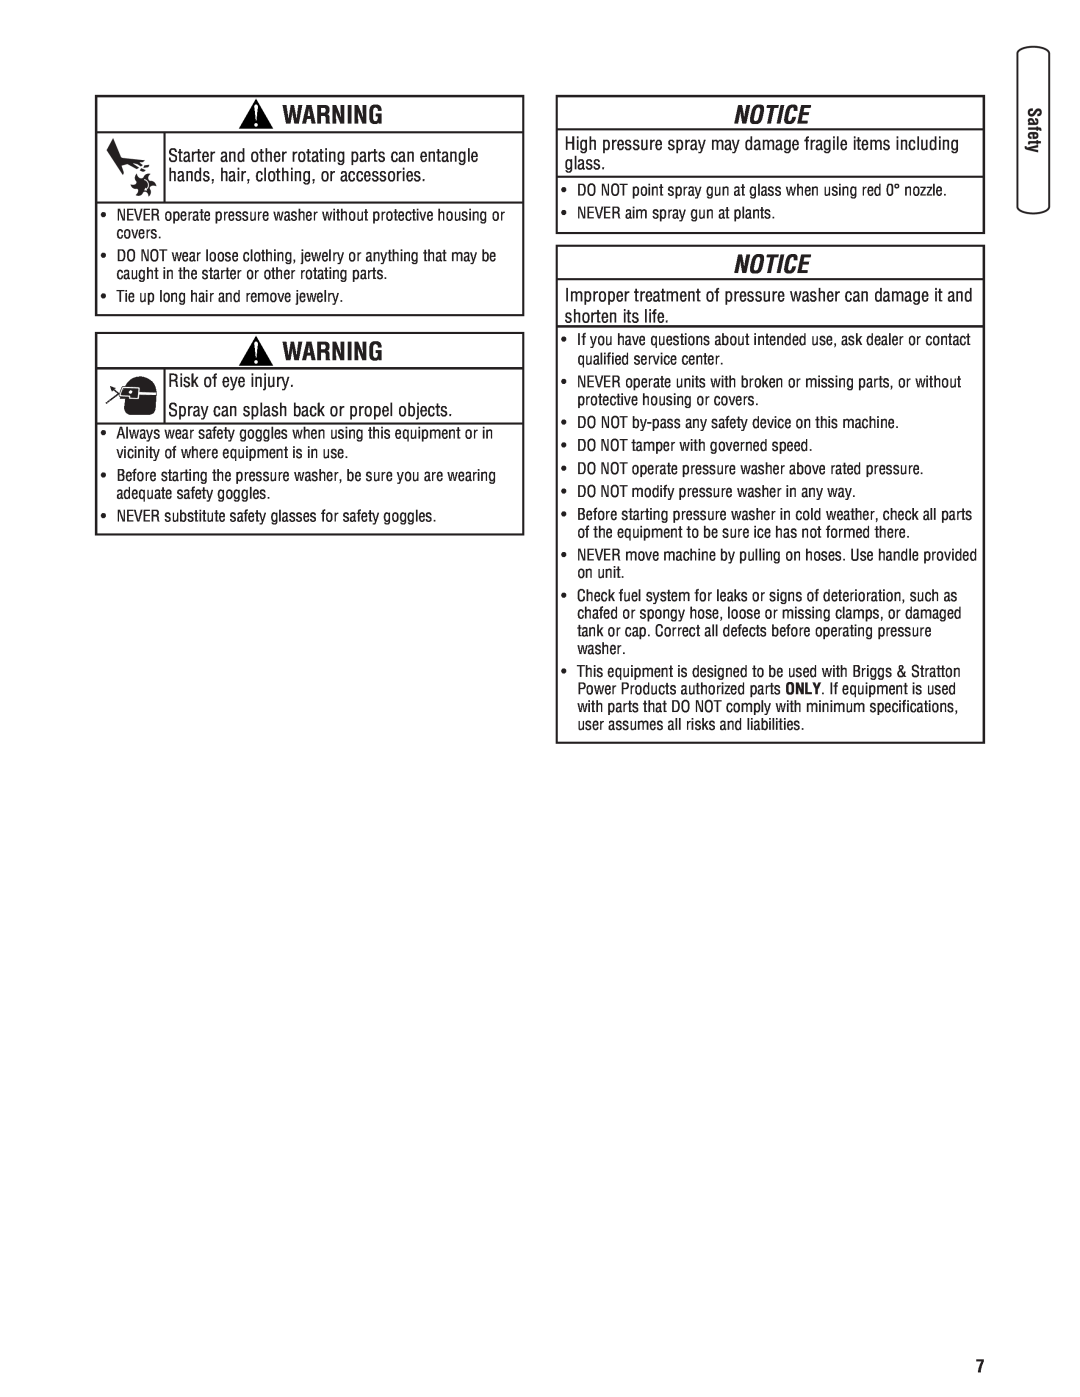 Briggs & Stratton 2900 PSI manual Notice, Risk of eye injury, Spray can splash back or propel objects 